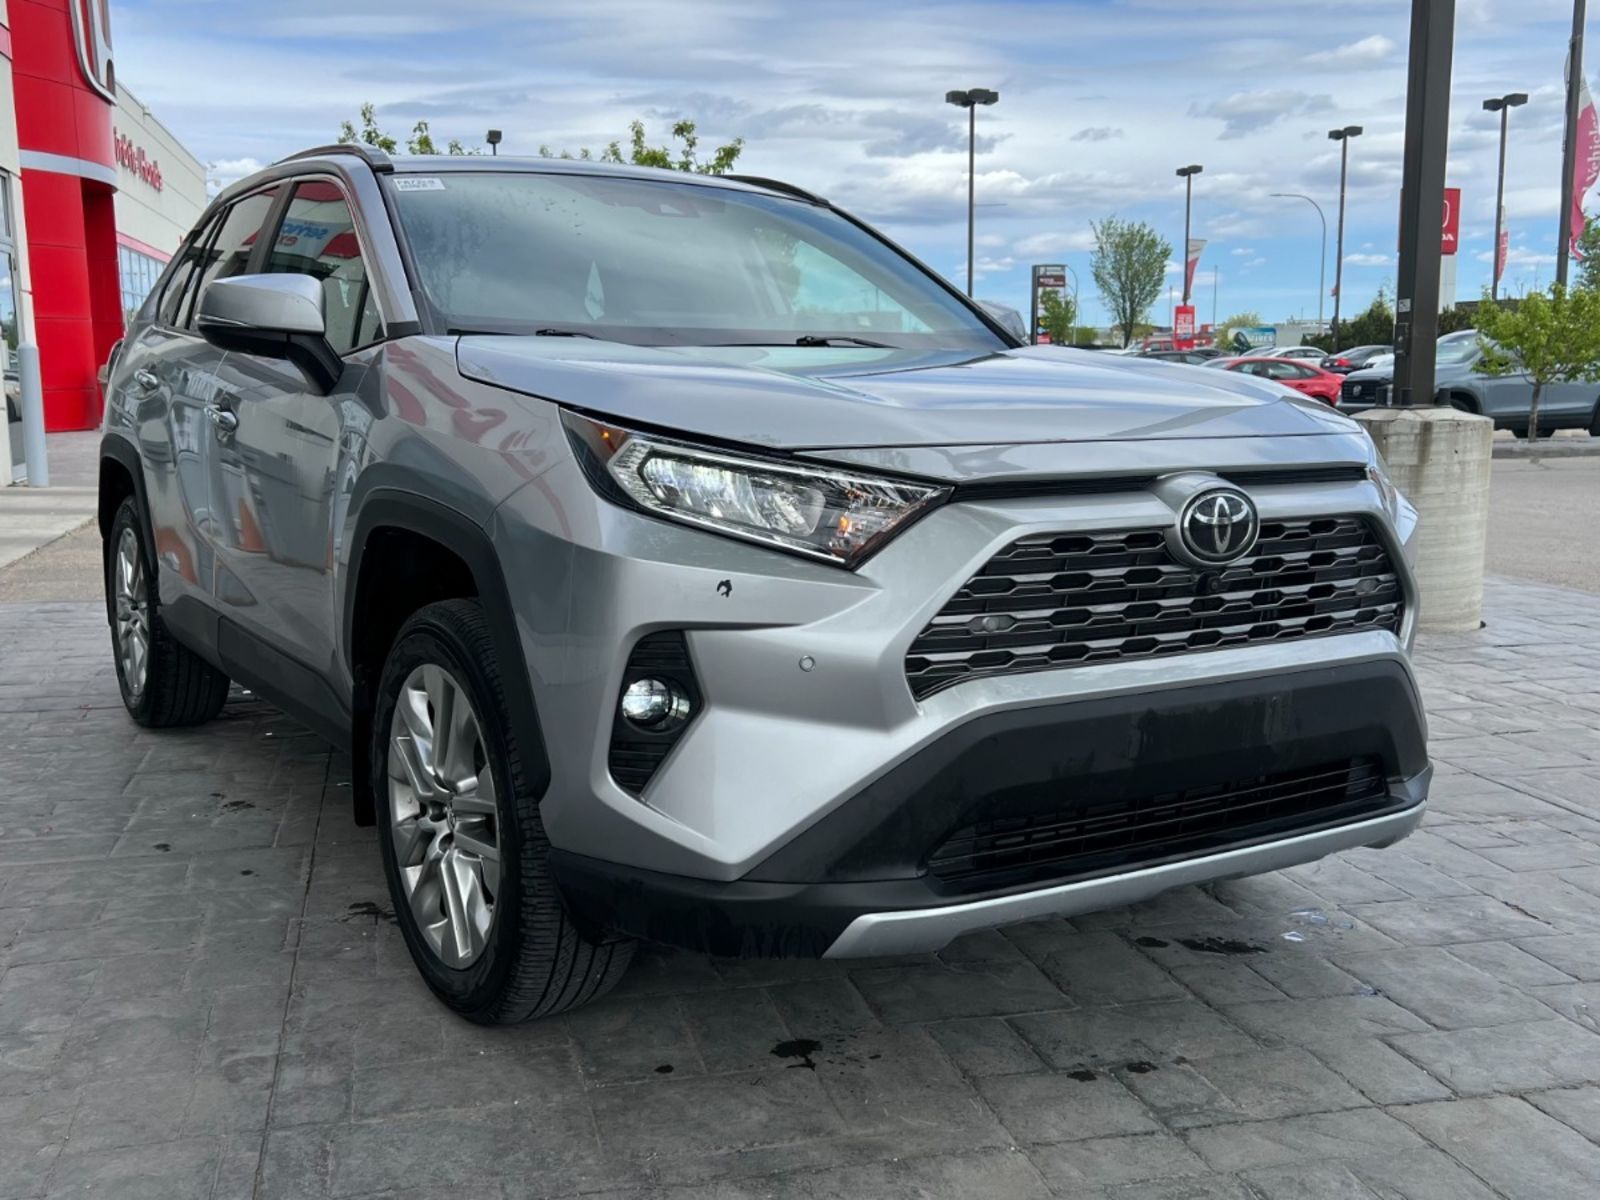 2021 Toyota RAV4 LIMITED, SUNROOF, LEATHER, NO ACCIDENTS!!